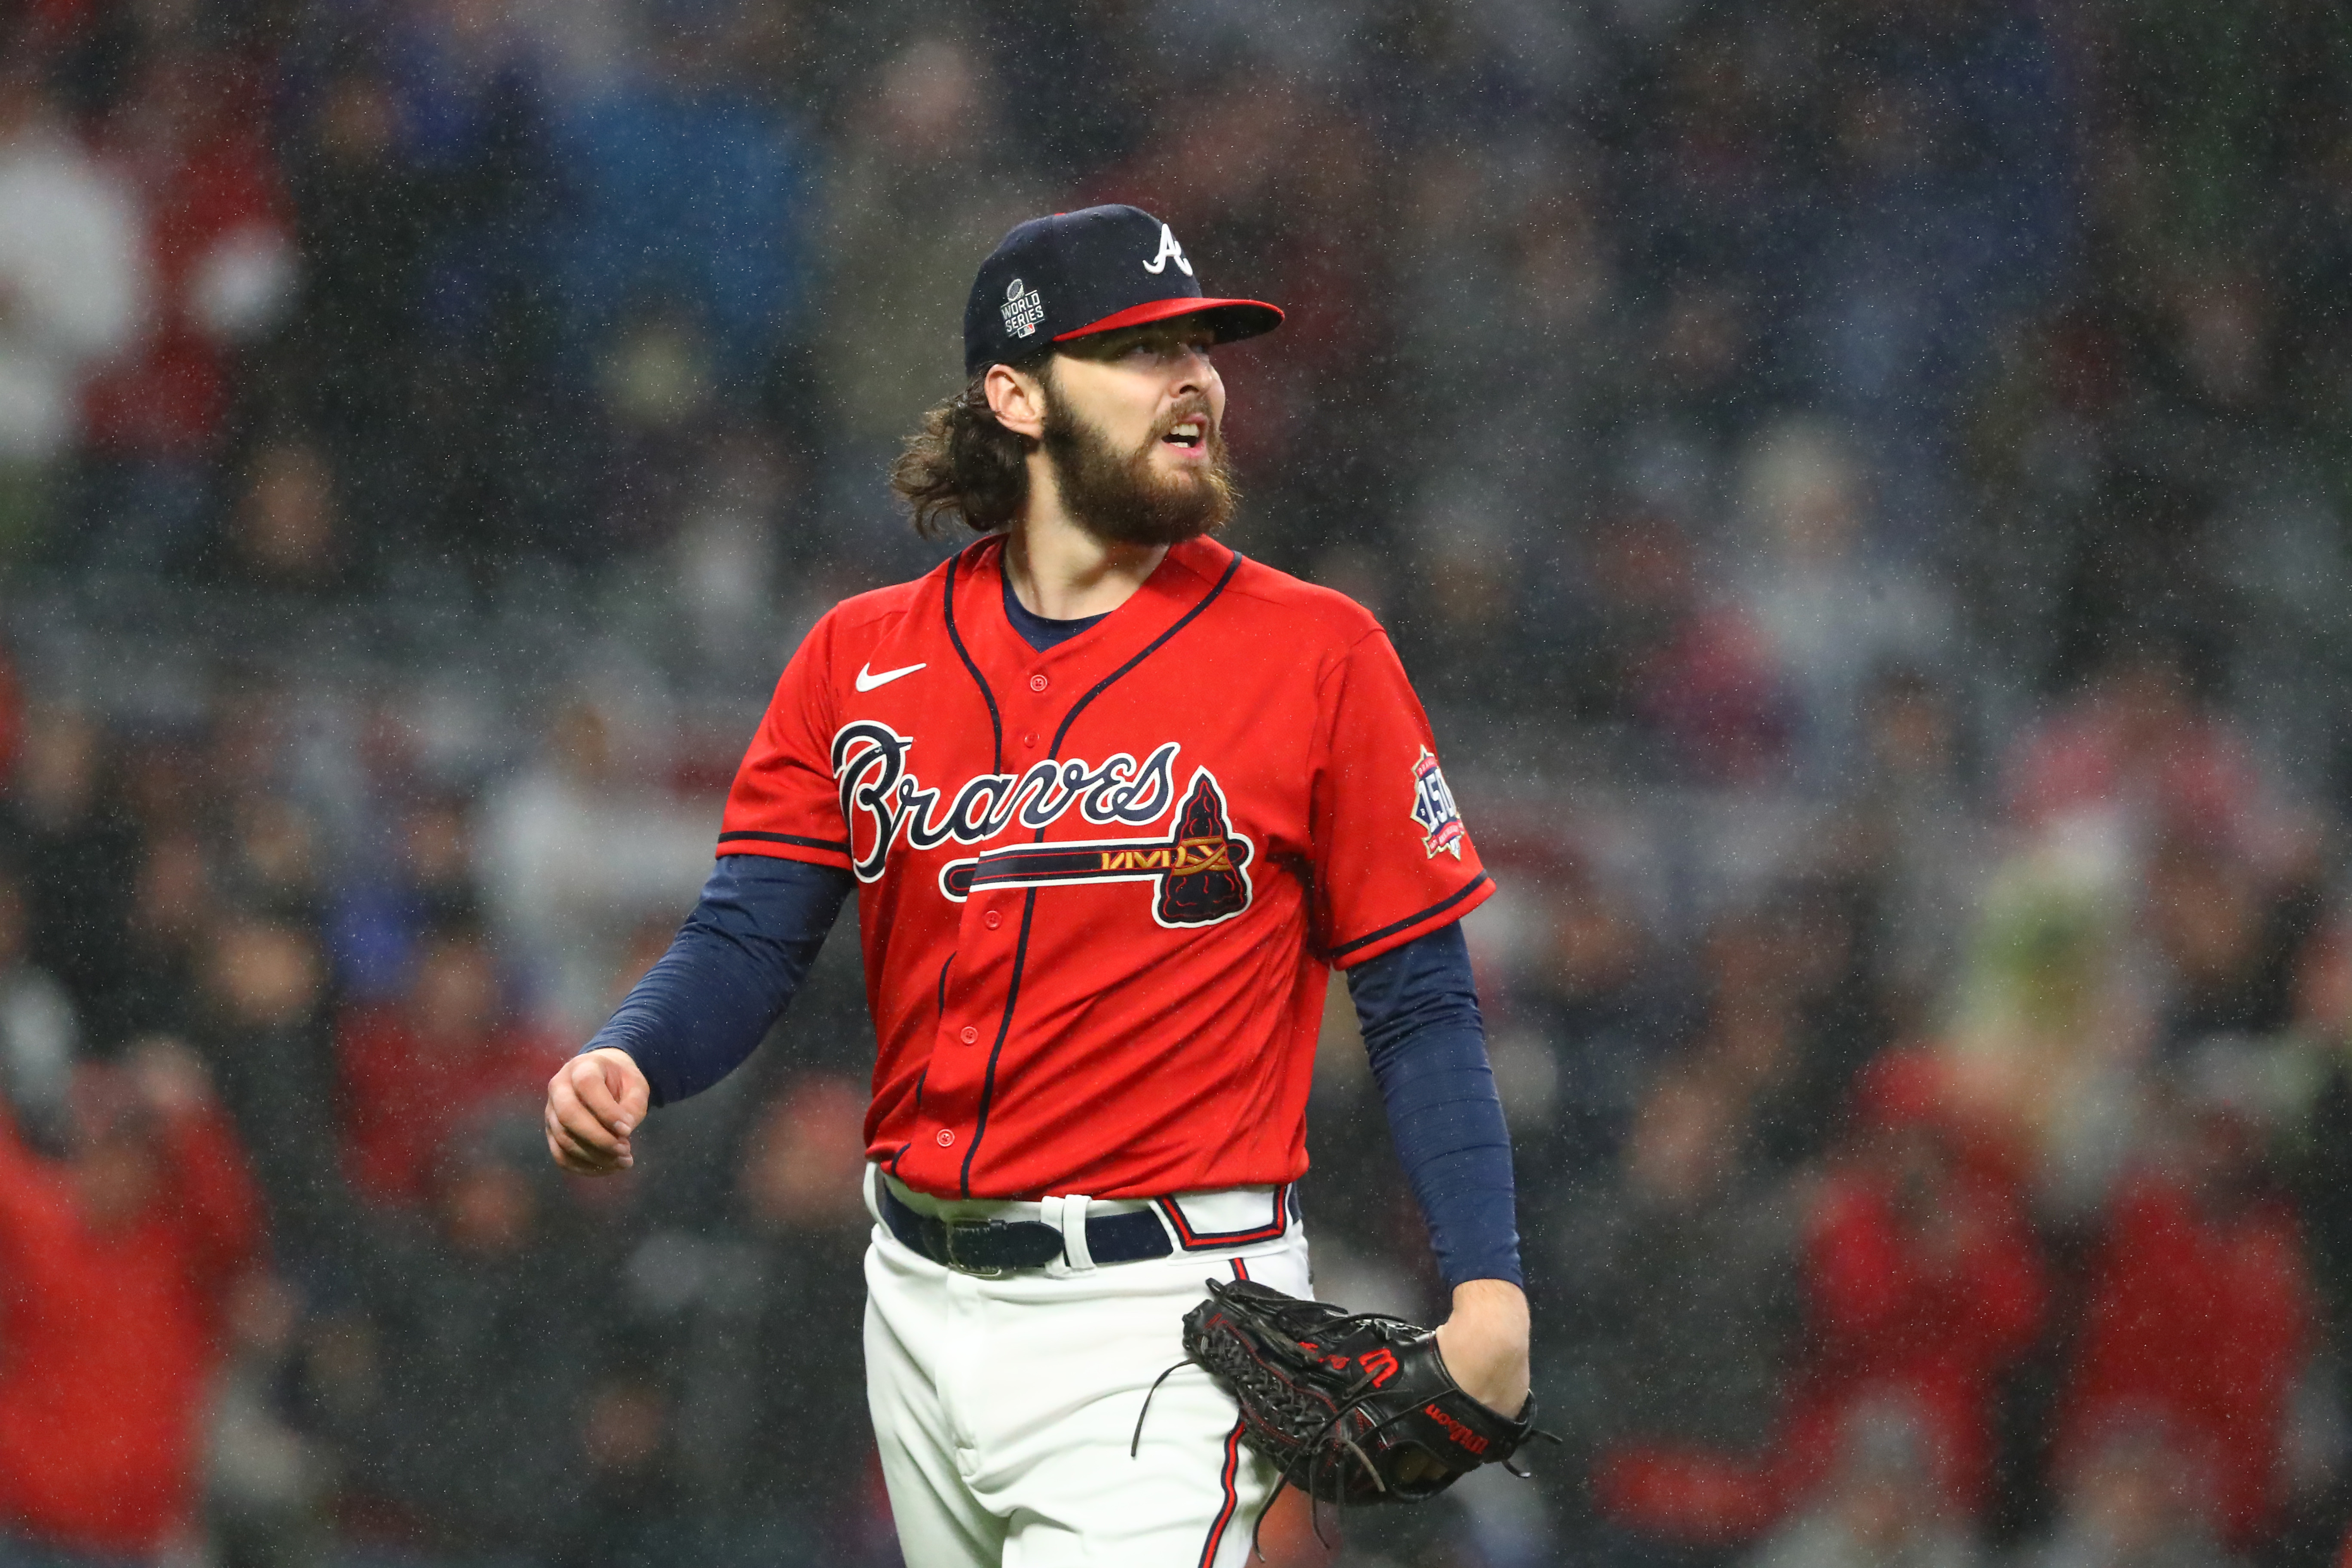 Braves now a win away from World Series